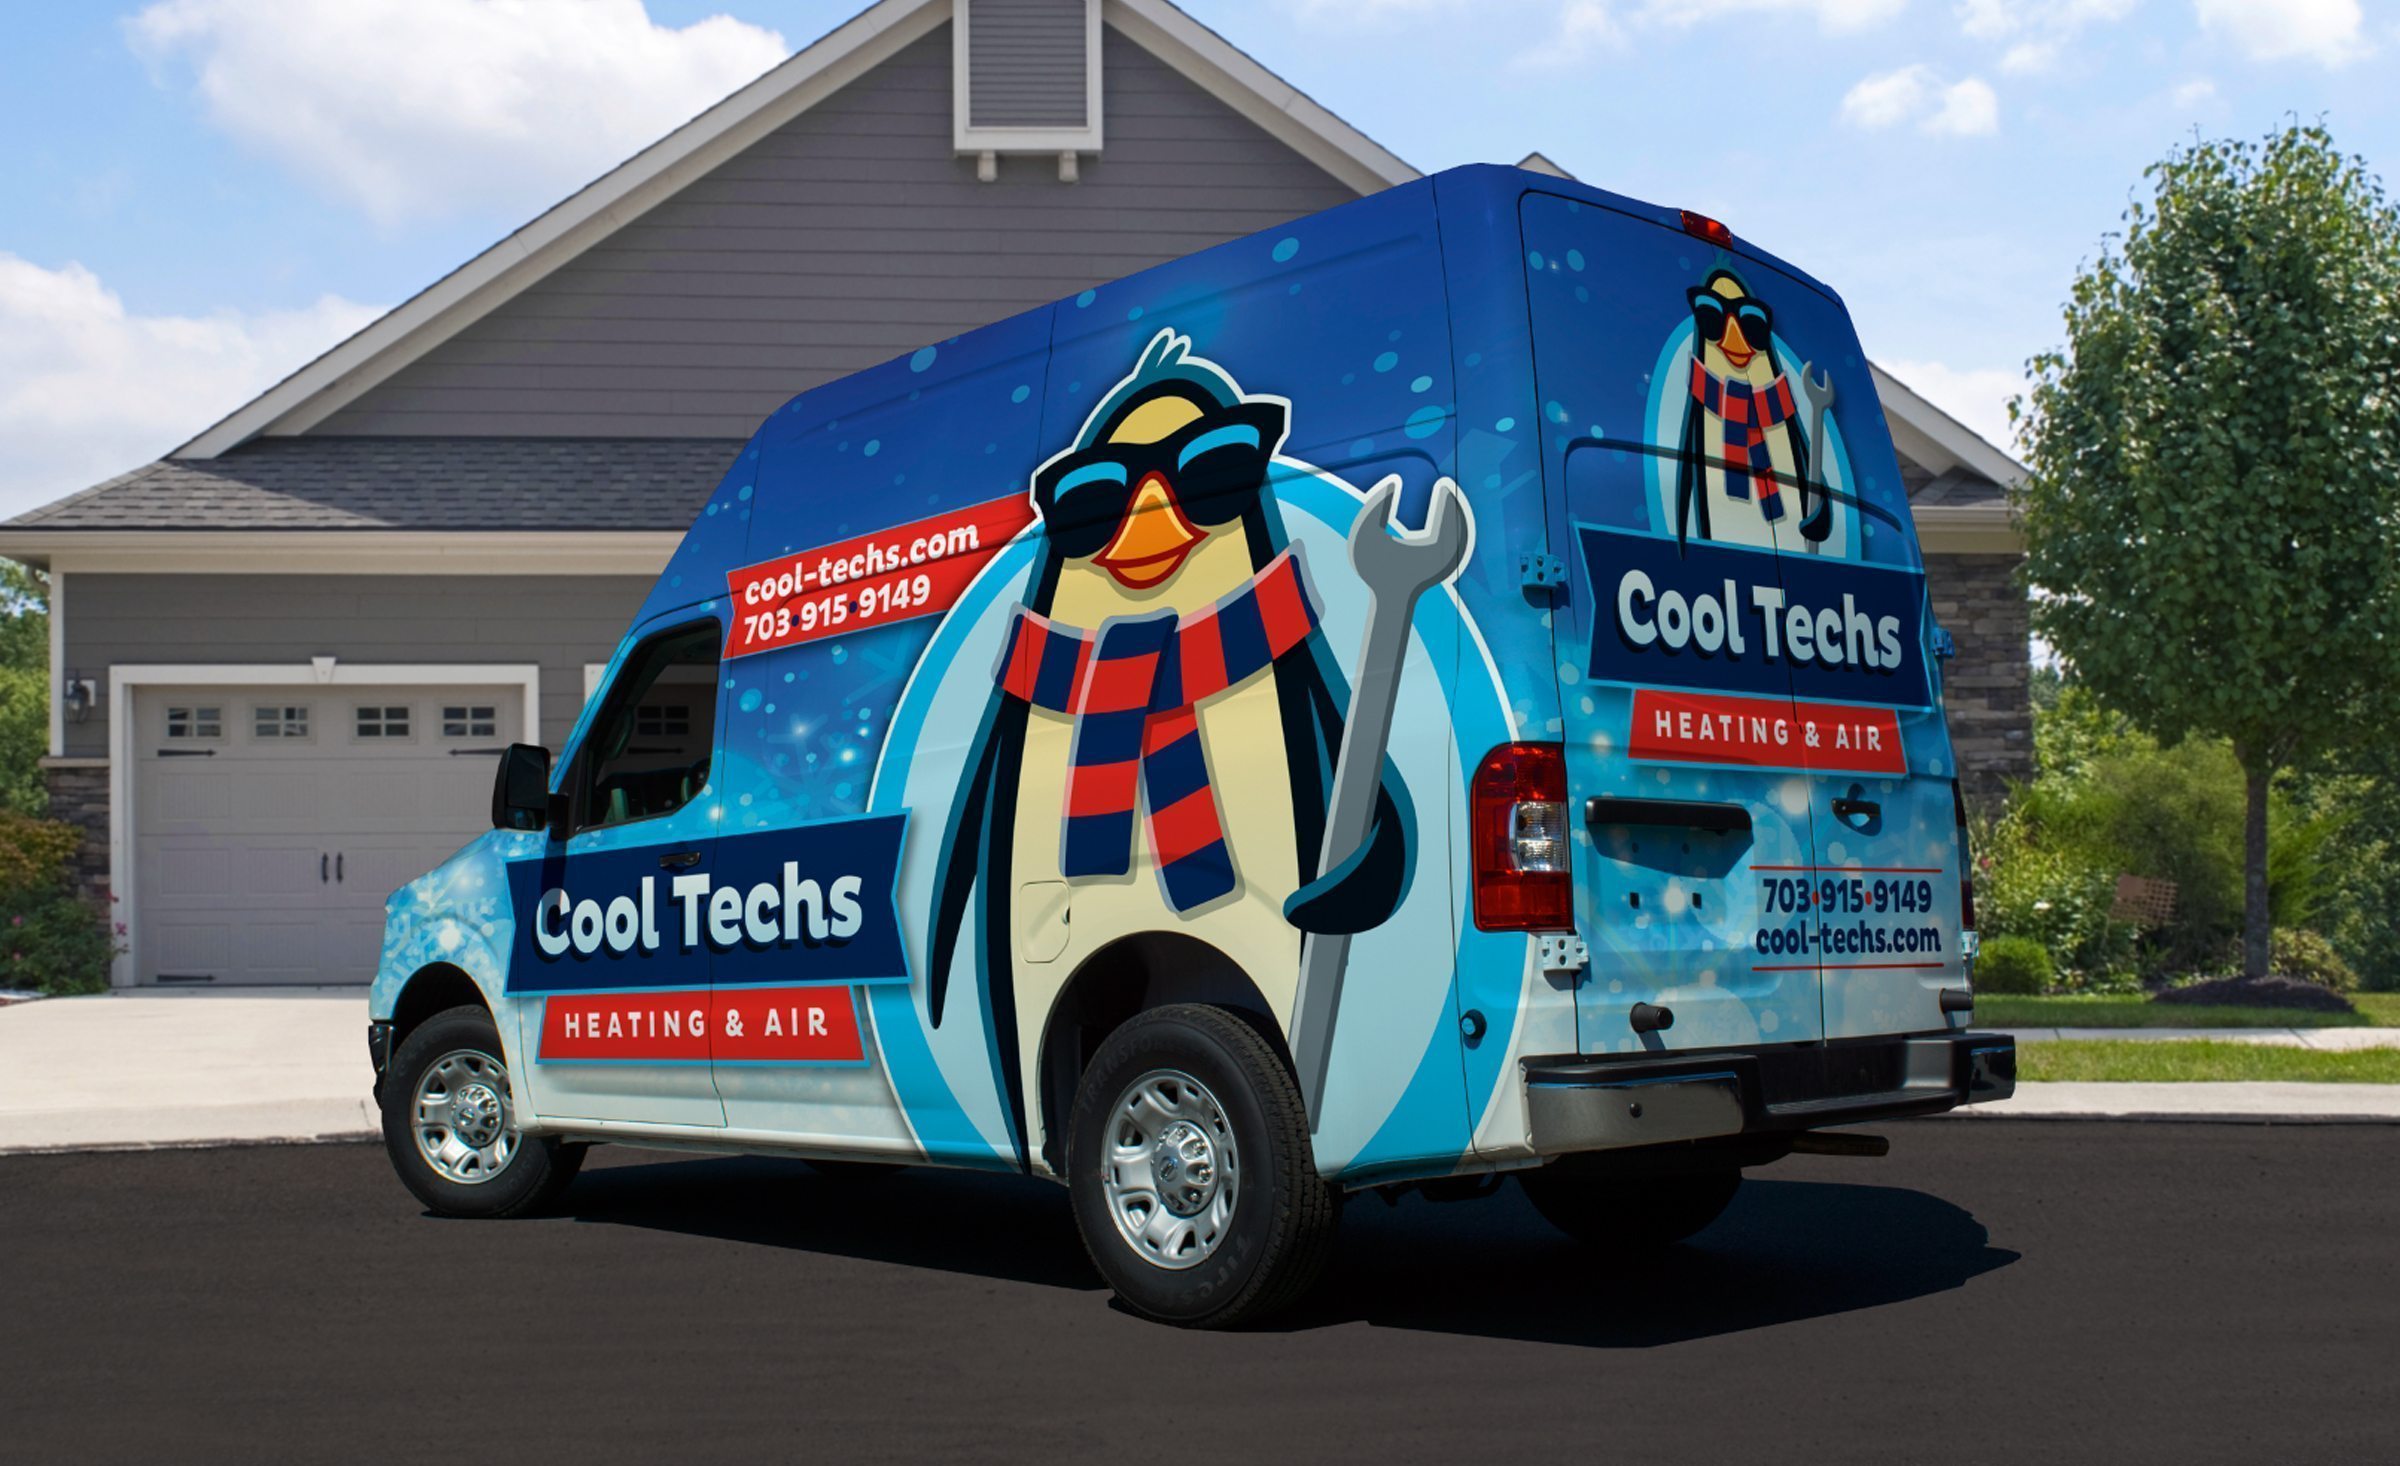 Truck wrap design for Cool Techs, a Linden, VA-based heating & air company.